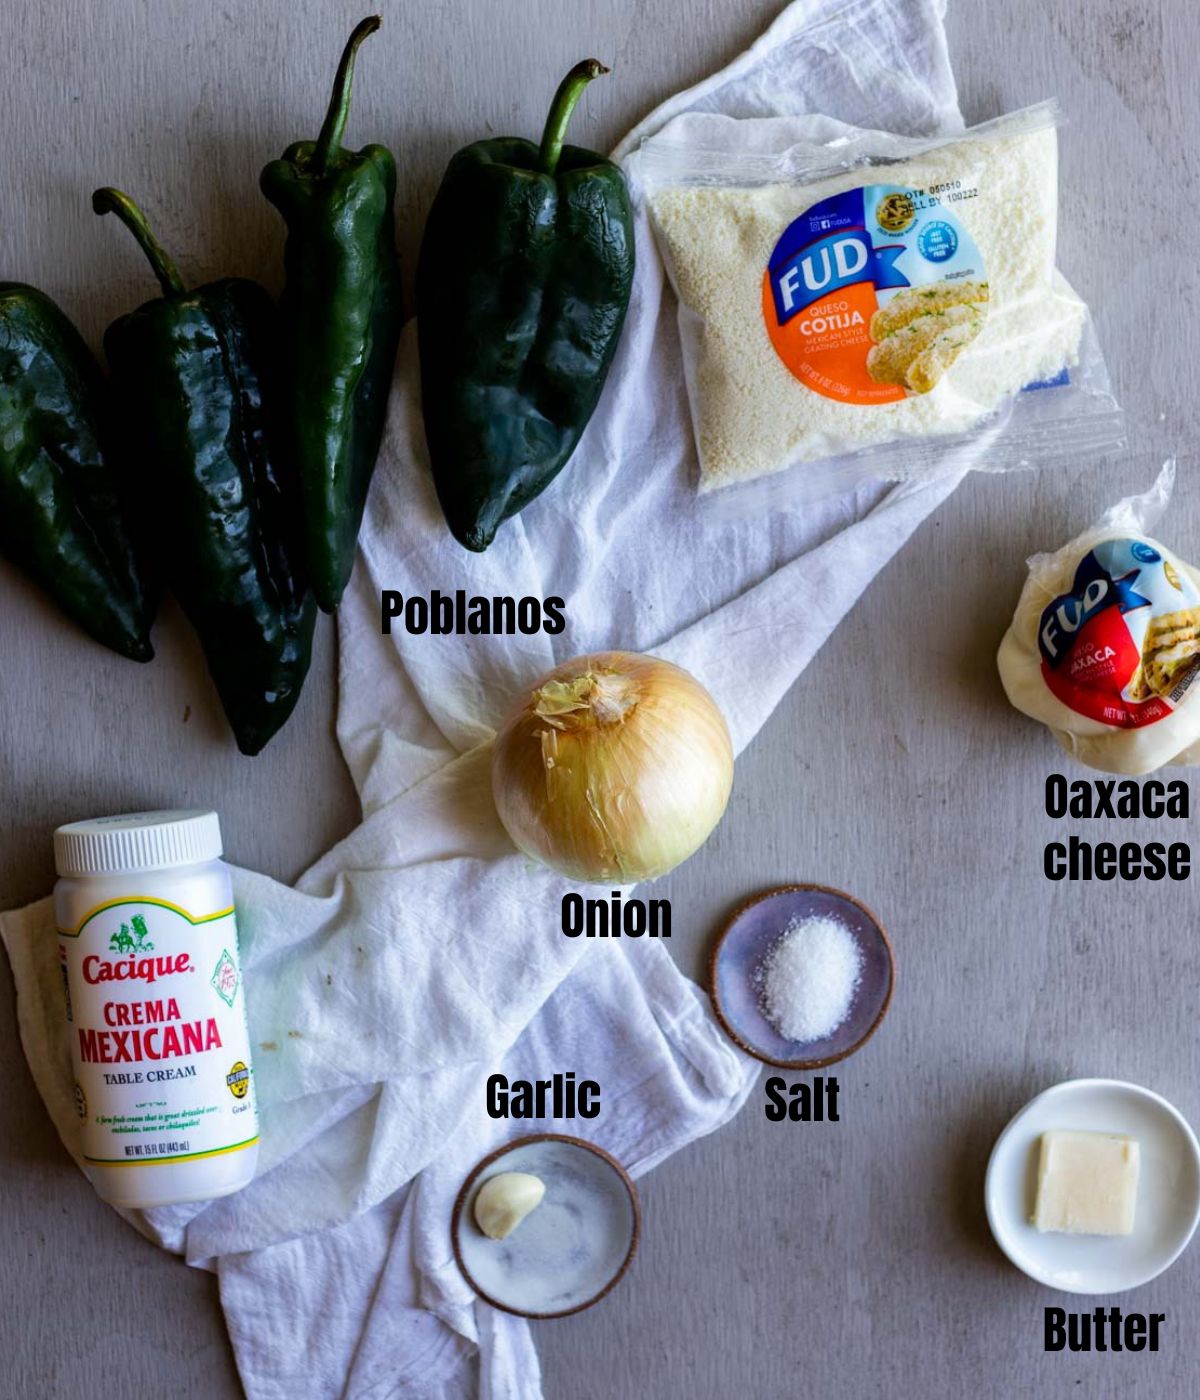 Ingredients to make rajas con crema arranged individually and labelled.